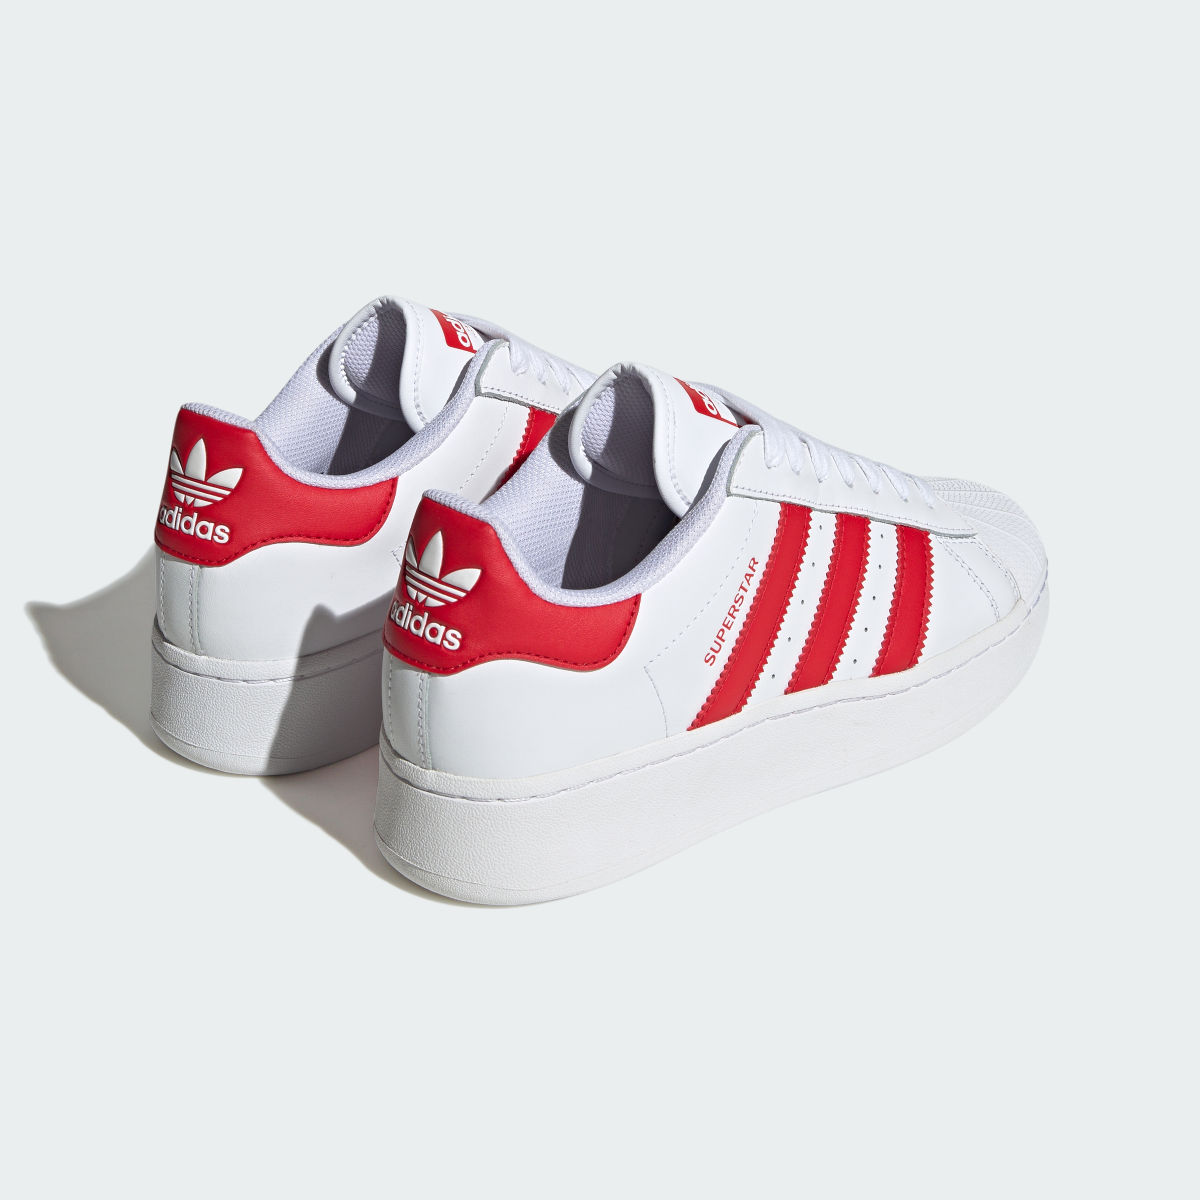 Adidas Superstar XLG Shoes. 6